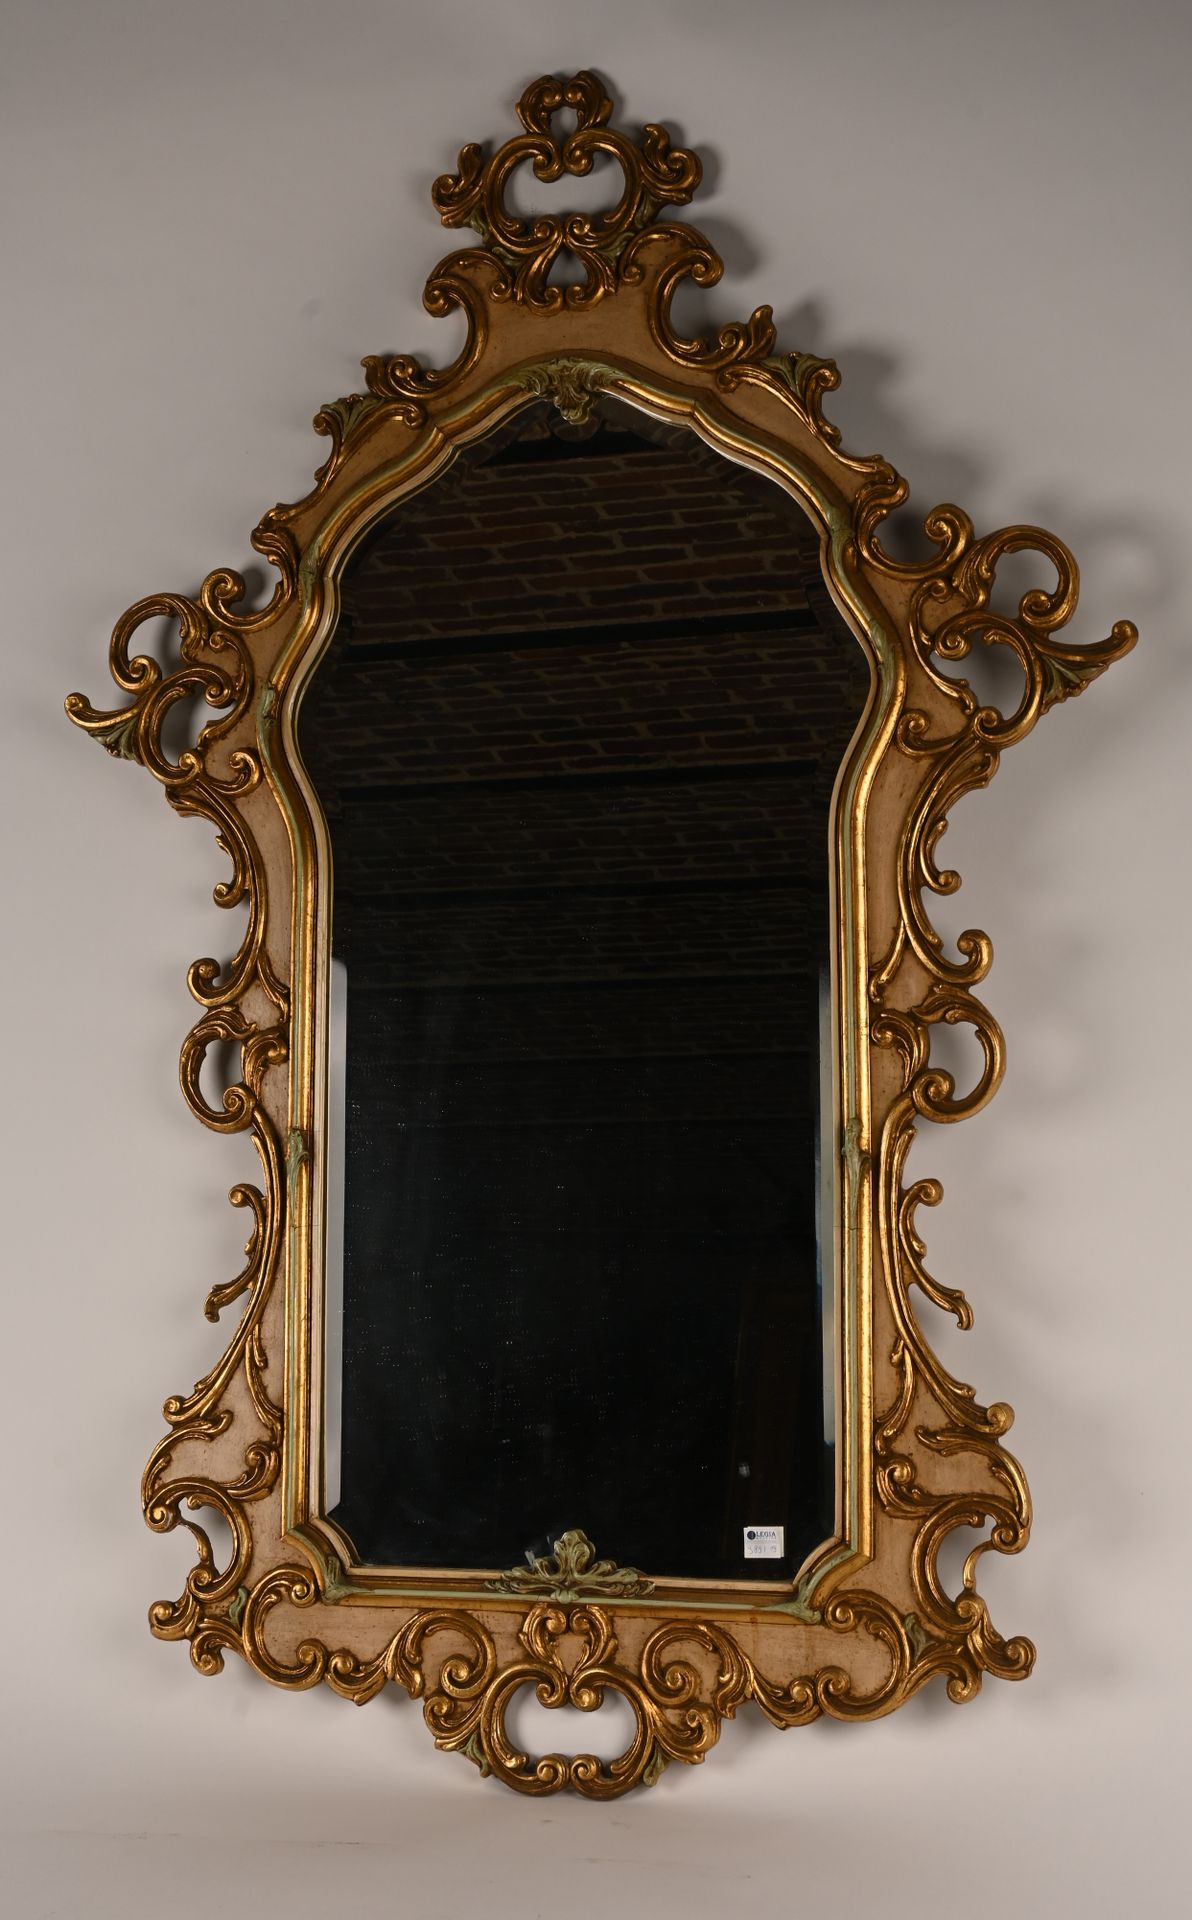 Miroir de style Louis XV Louis XV style mirror in painted and gilded wood.
Work &hellip;